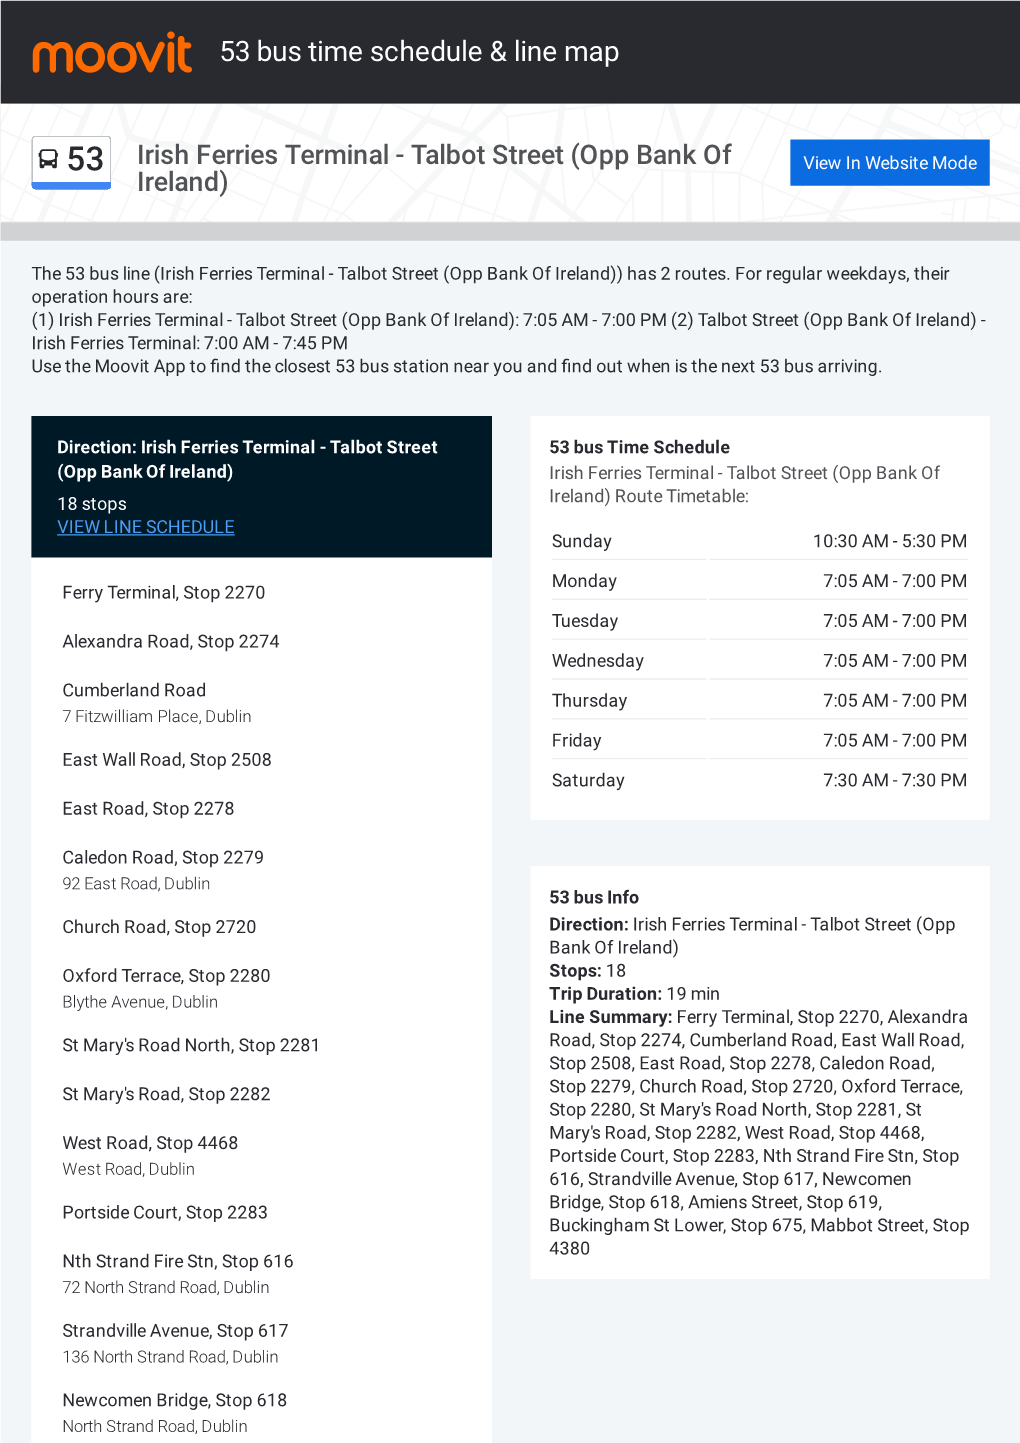 53 Bus Time Schedule & Line Route